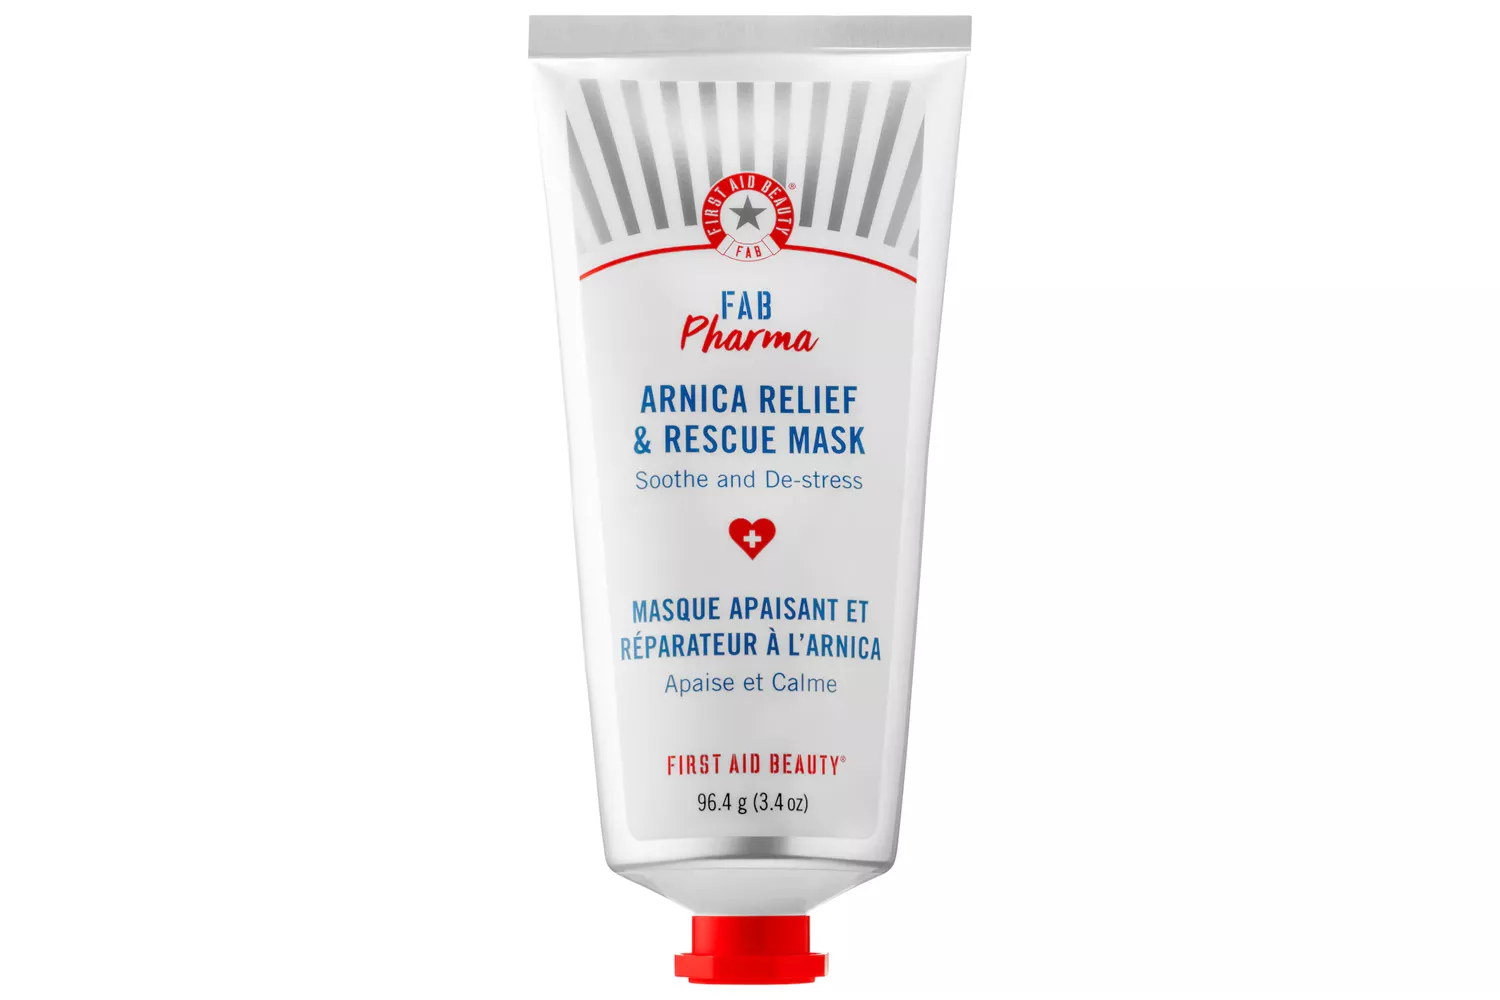 first-aid-beauty-fab-pharma-arnica-relief-rescue-mask